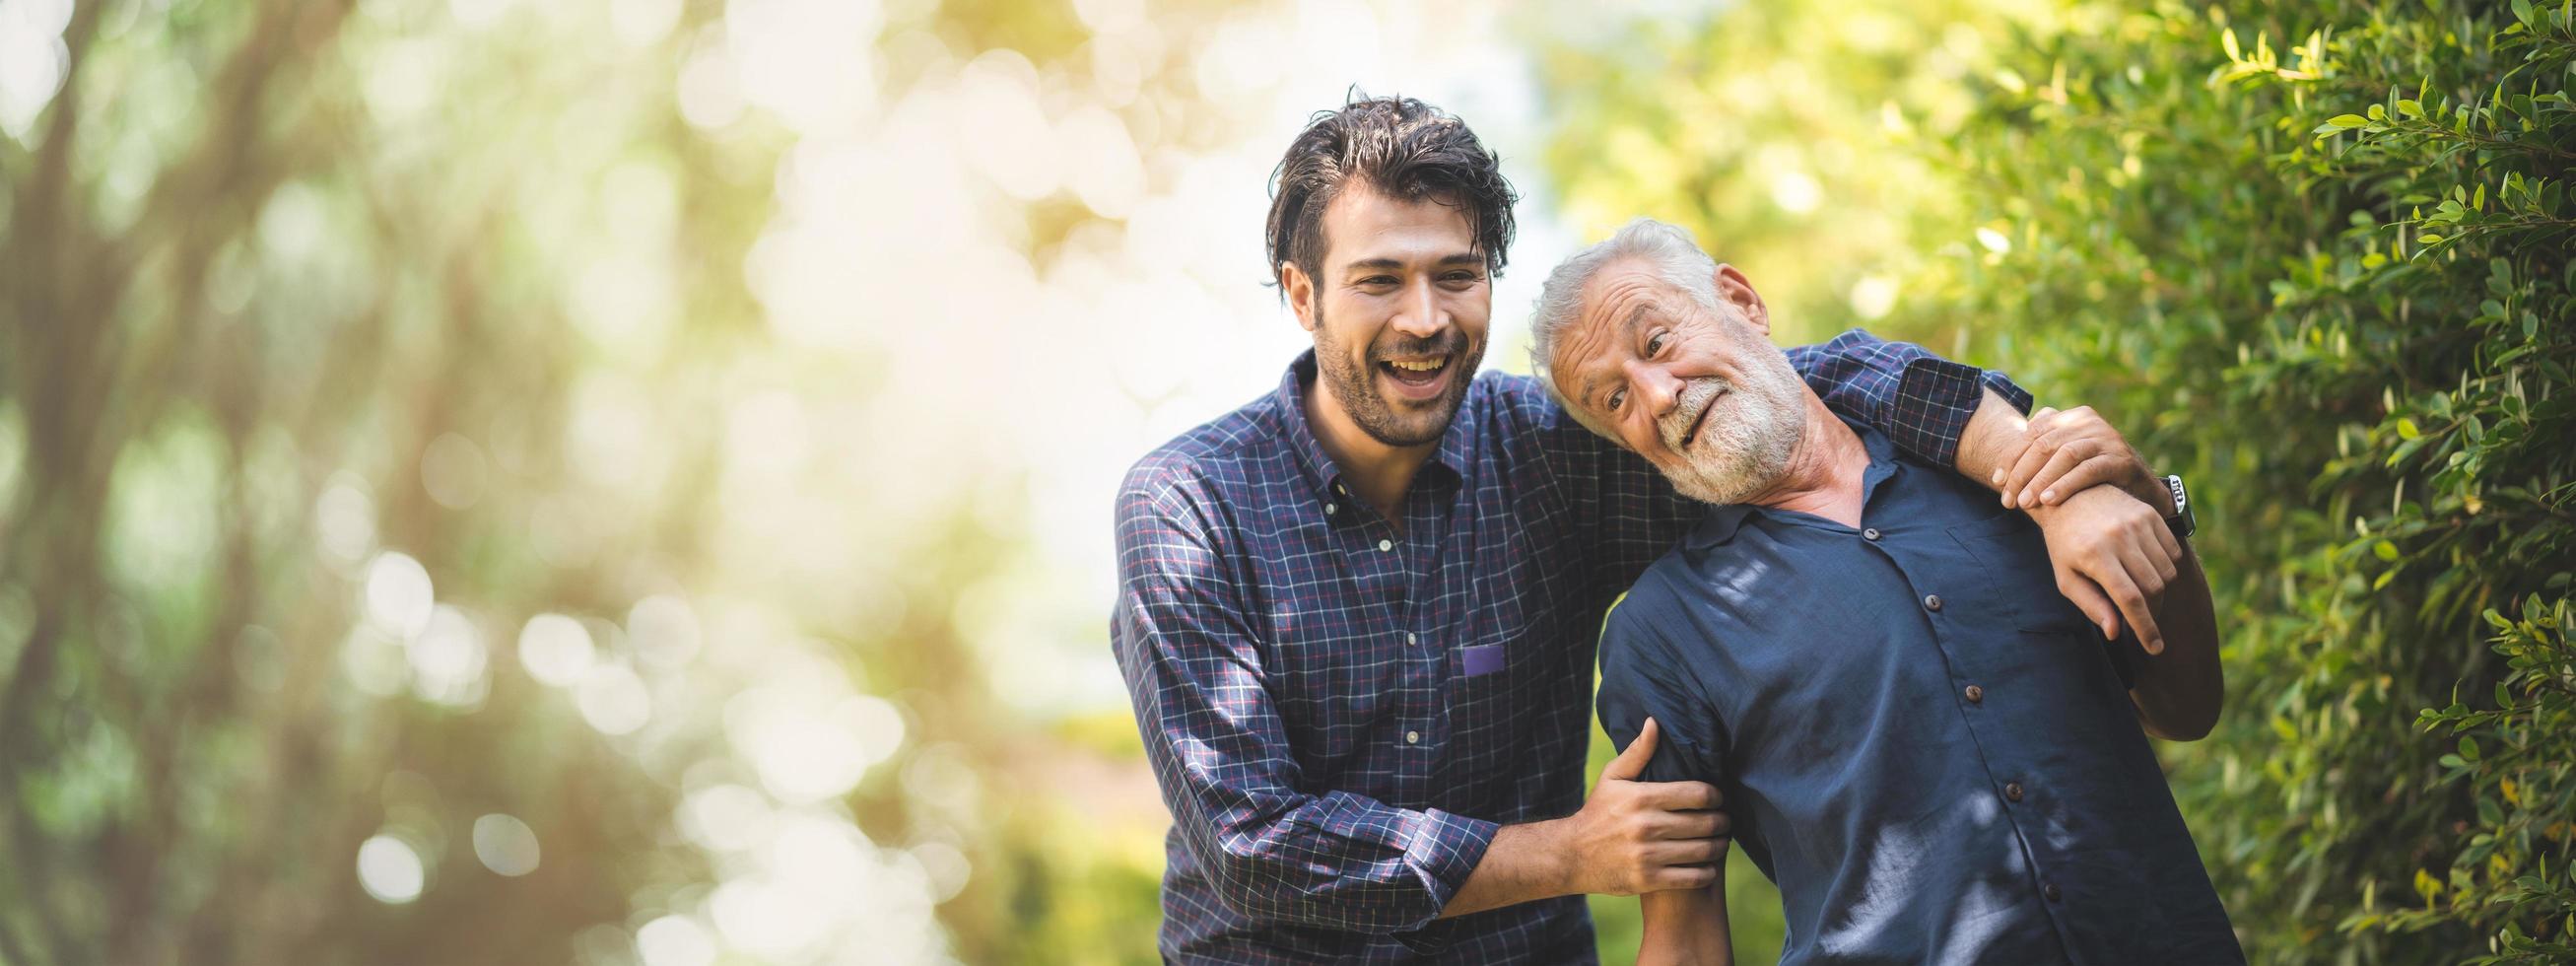 senior father with adult son in family concept banner background with copy space, elderly old man person are happy and enjoy with hipster son together by walking outdoor in nature photo